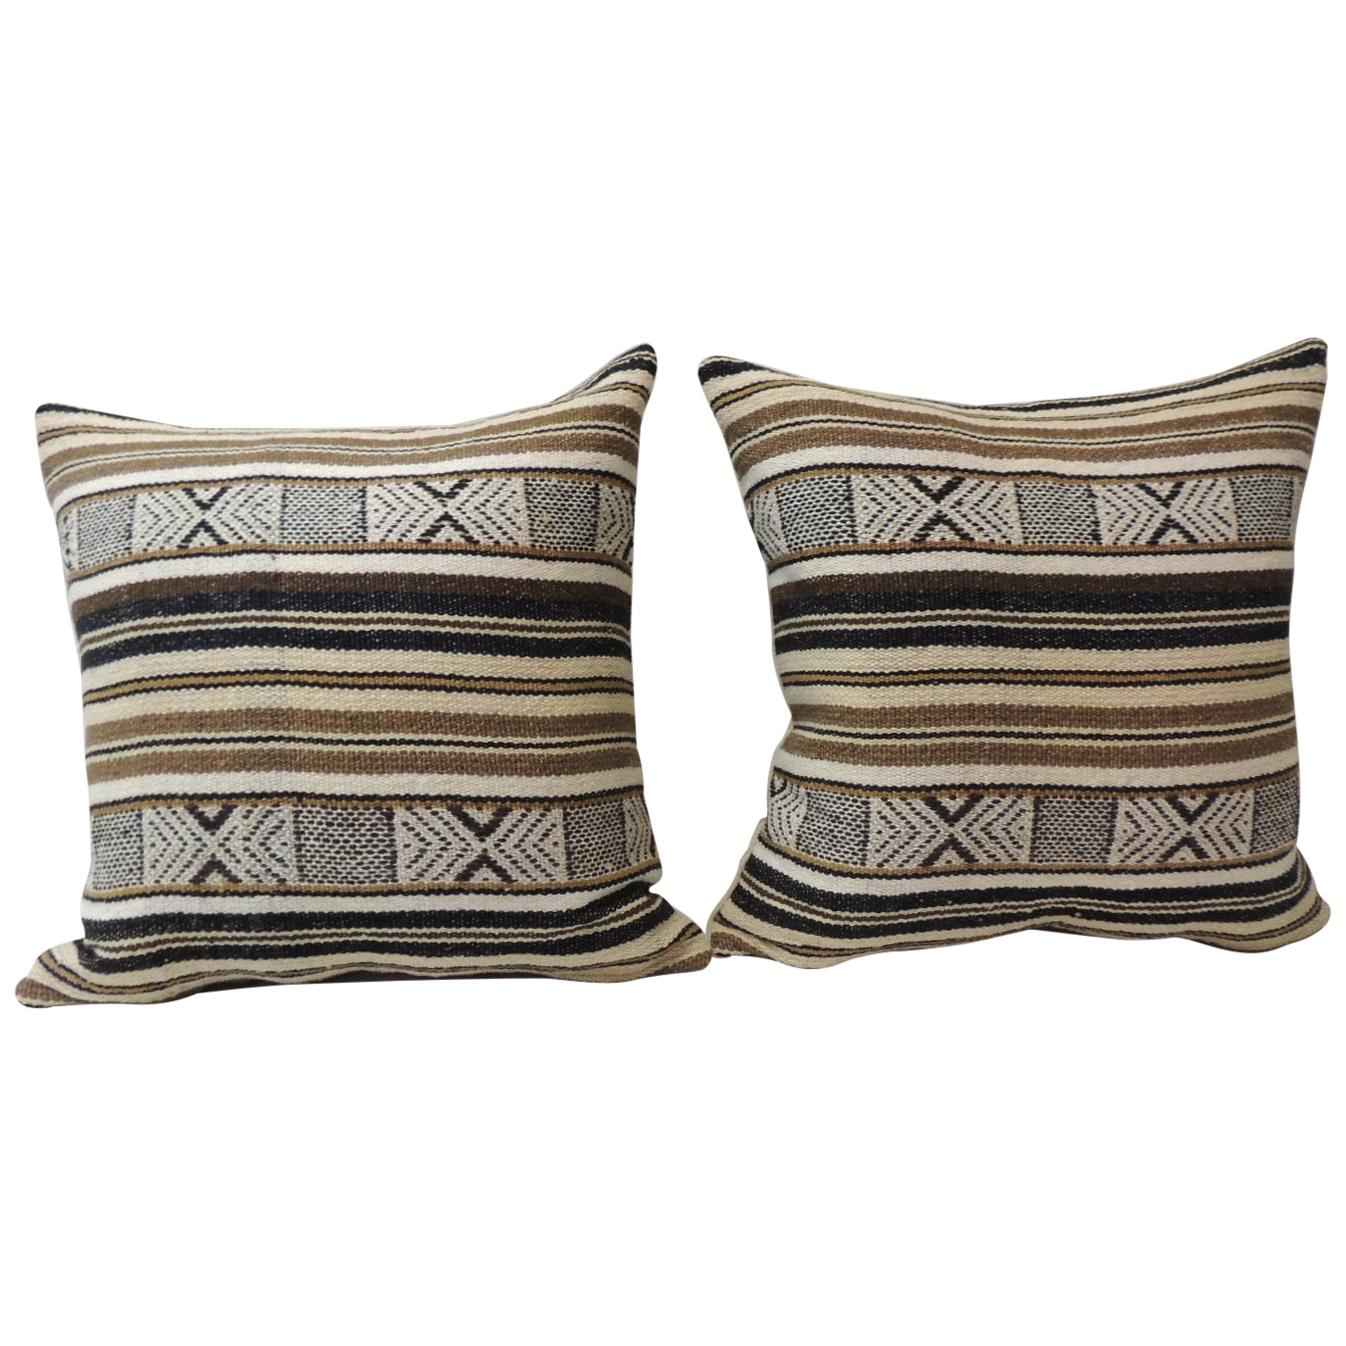 Pair of Black and Brown Woven Square Decorative Pillows